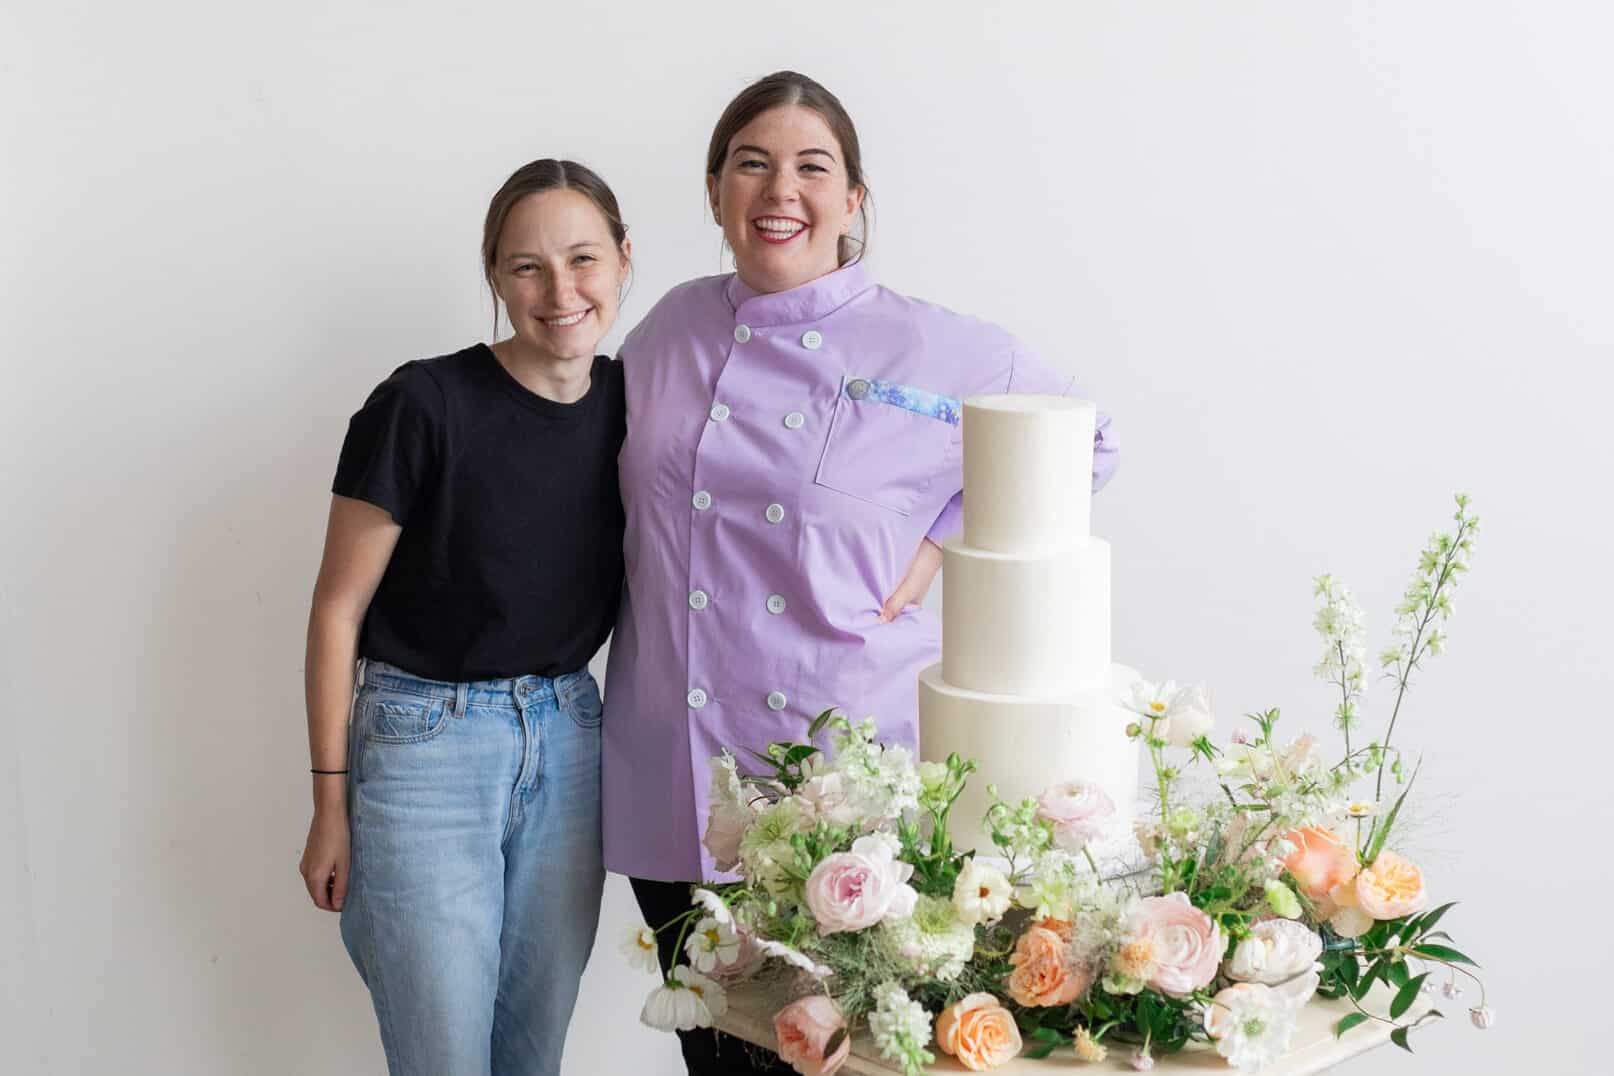 Caroline and Heather, a wedding florist and a wedding baker, pose in a hug. They are standing behind an antique white table that has a wedding cake and a flower cake meadow on it. They are Utah wedding vendors who like to collaborate and both own small businesses. 